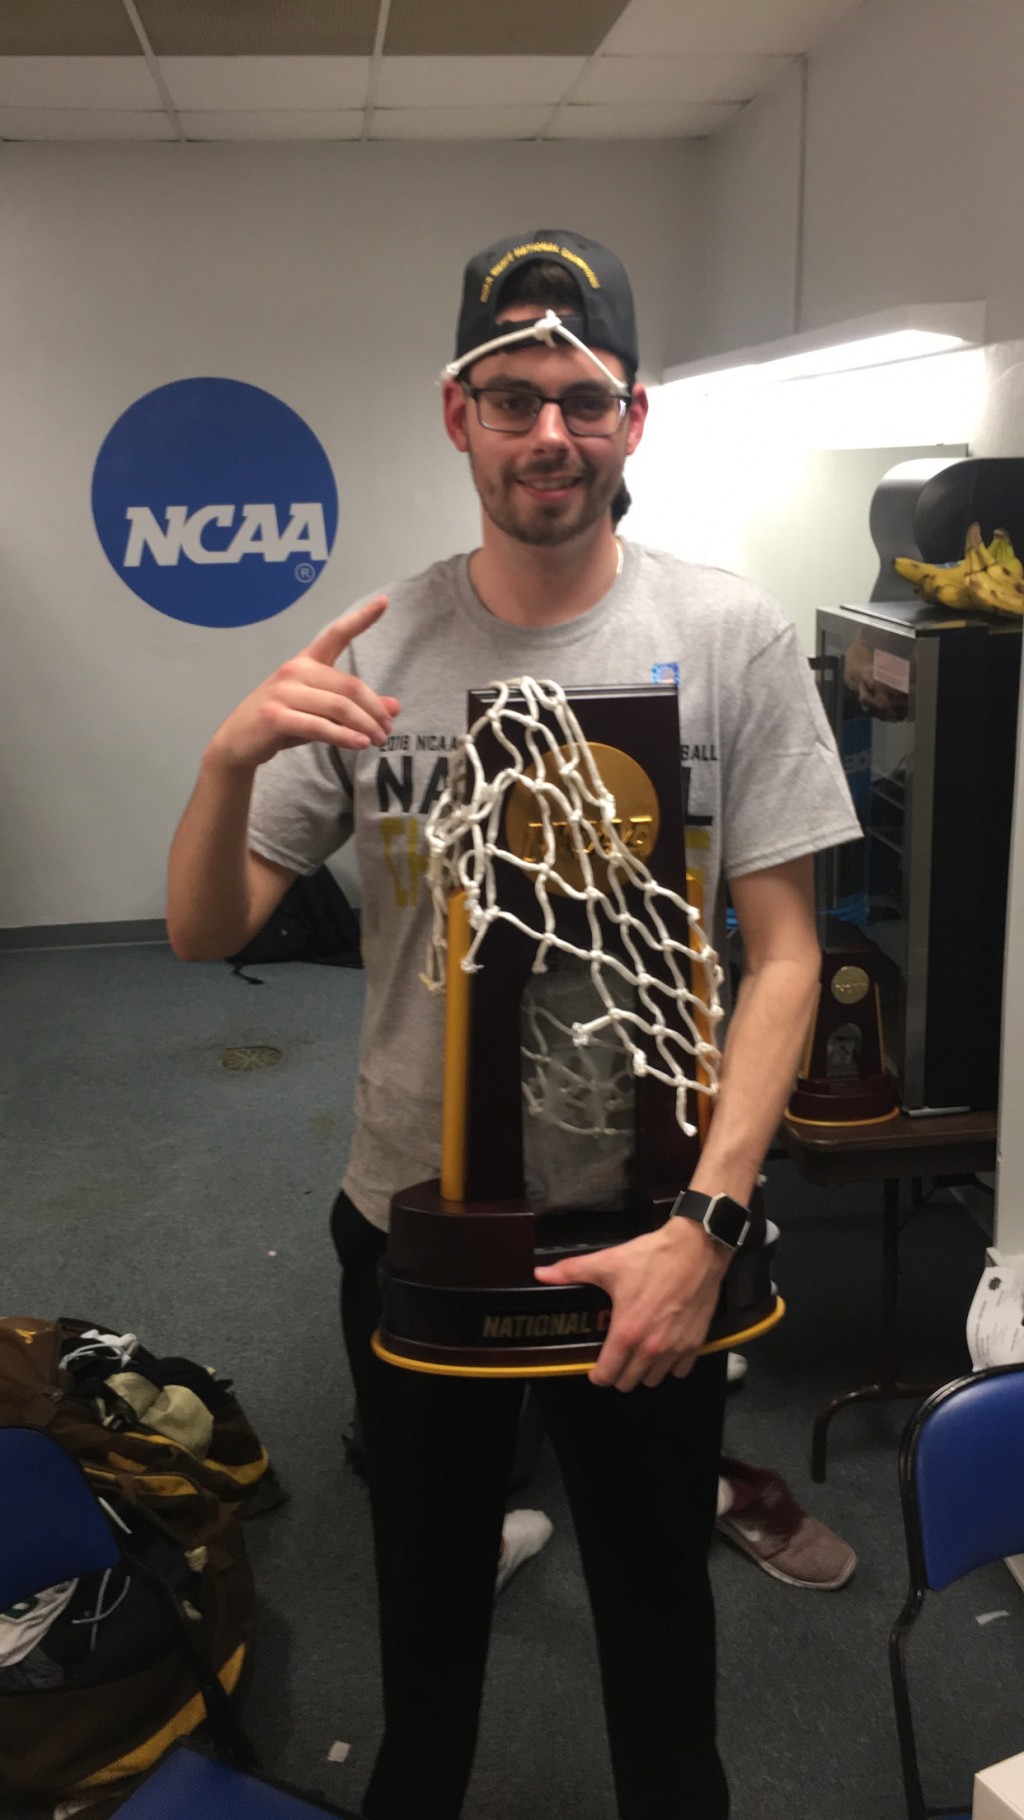 Grad wins division III hoops championship in first year as assistant coach